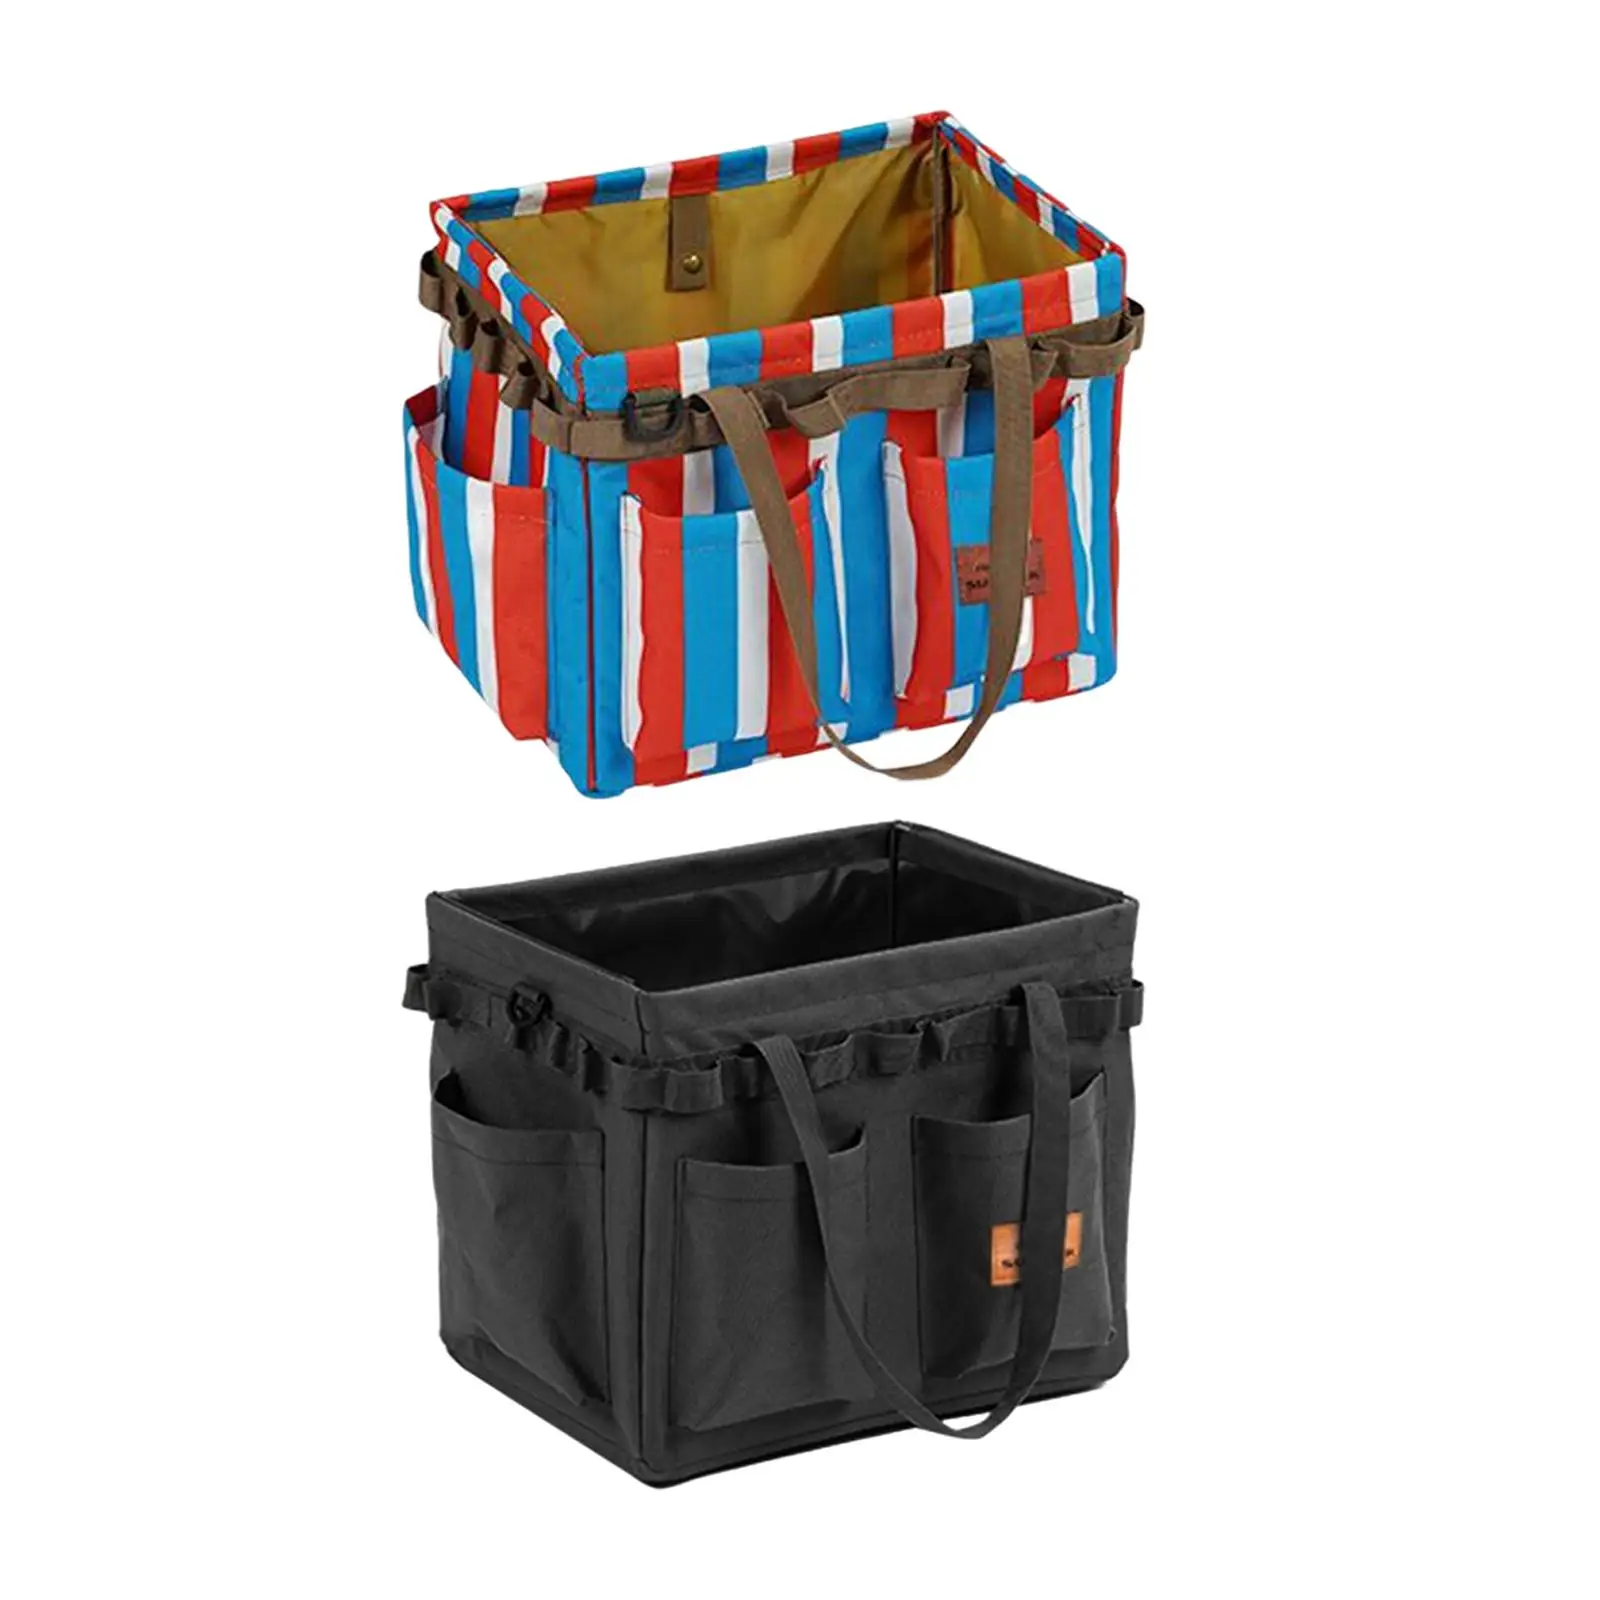 Foldable Tool Organizer with Pocket and Loop, Large Capacity Camping Bag for